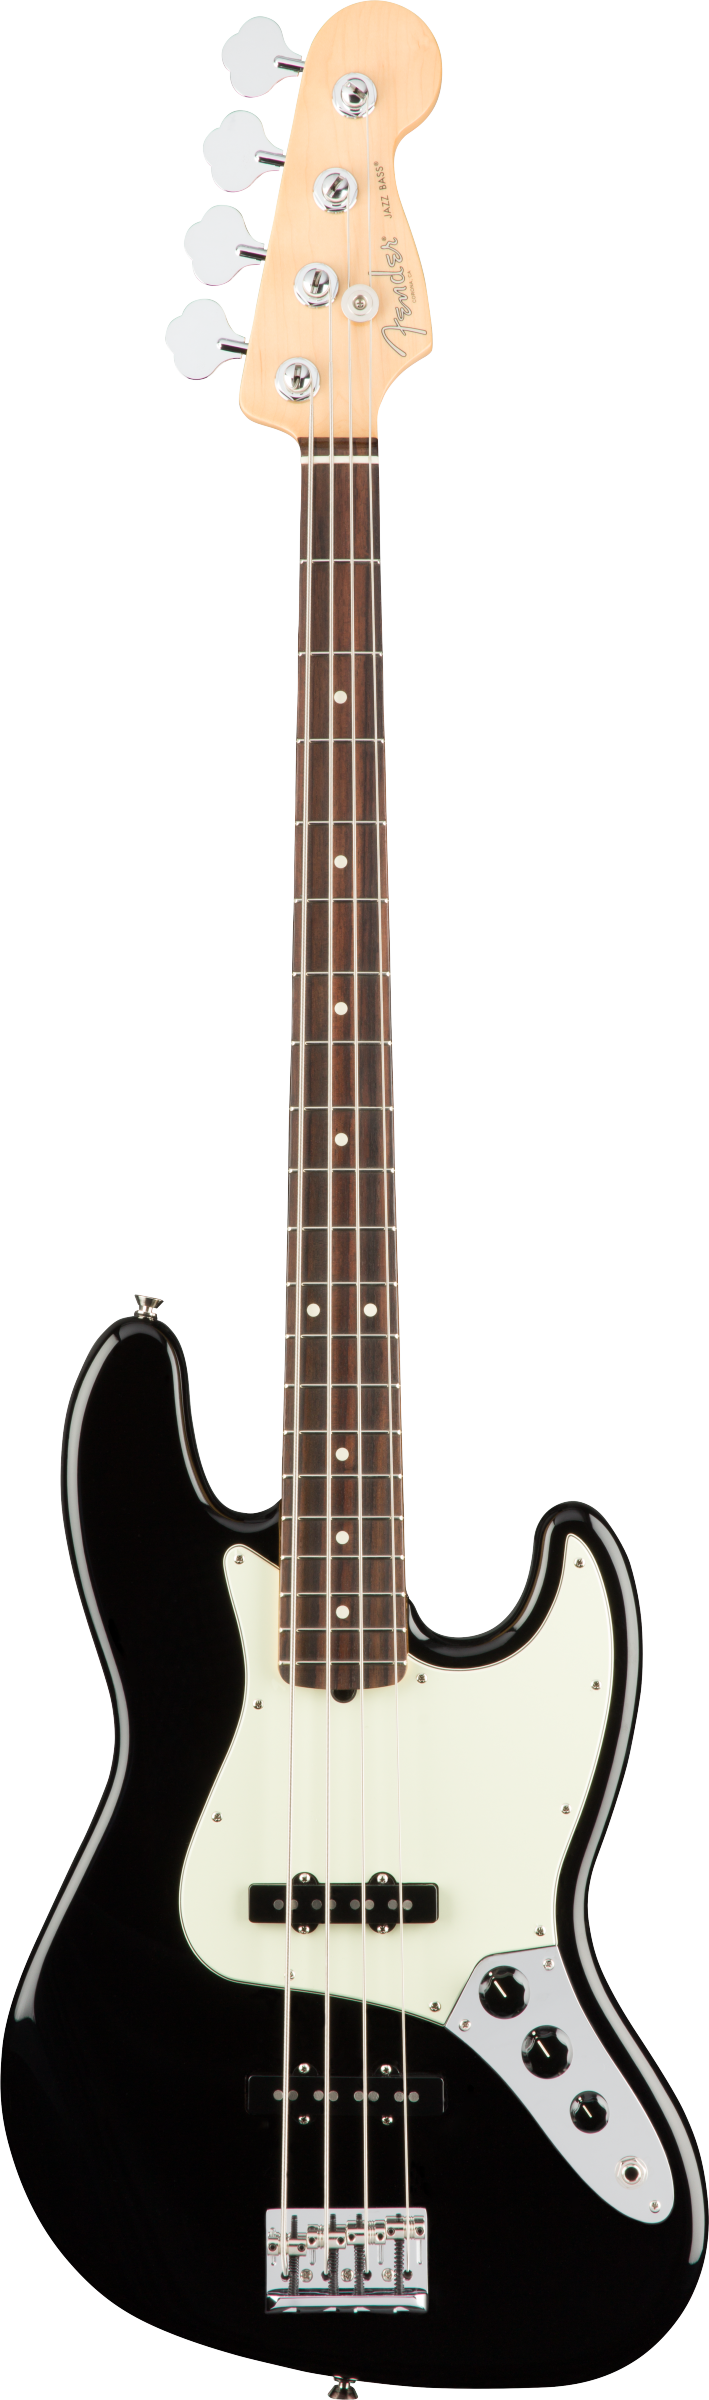 Clearance/Used/Demo American Pro Jazz Bass, Rosewood Fingerboard, Black